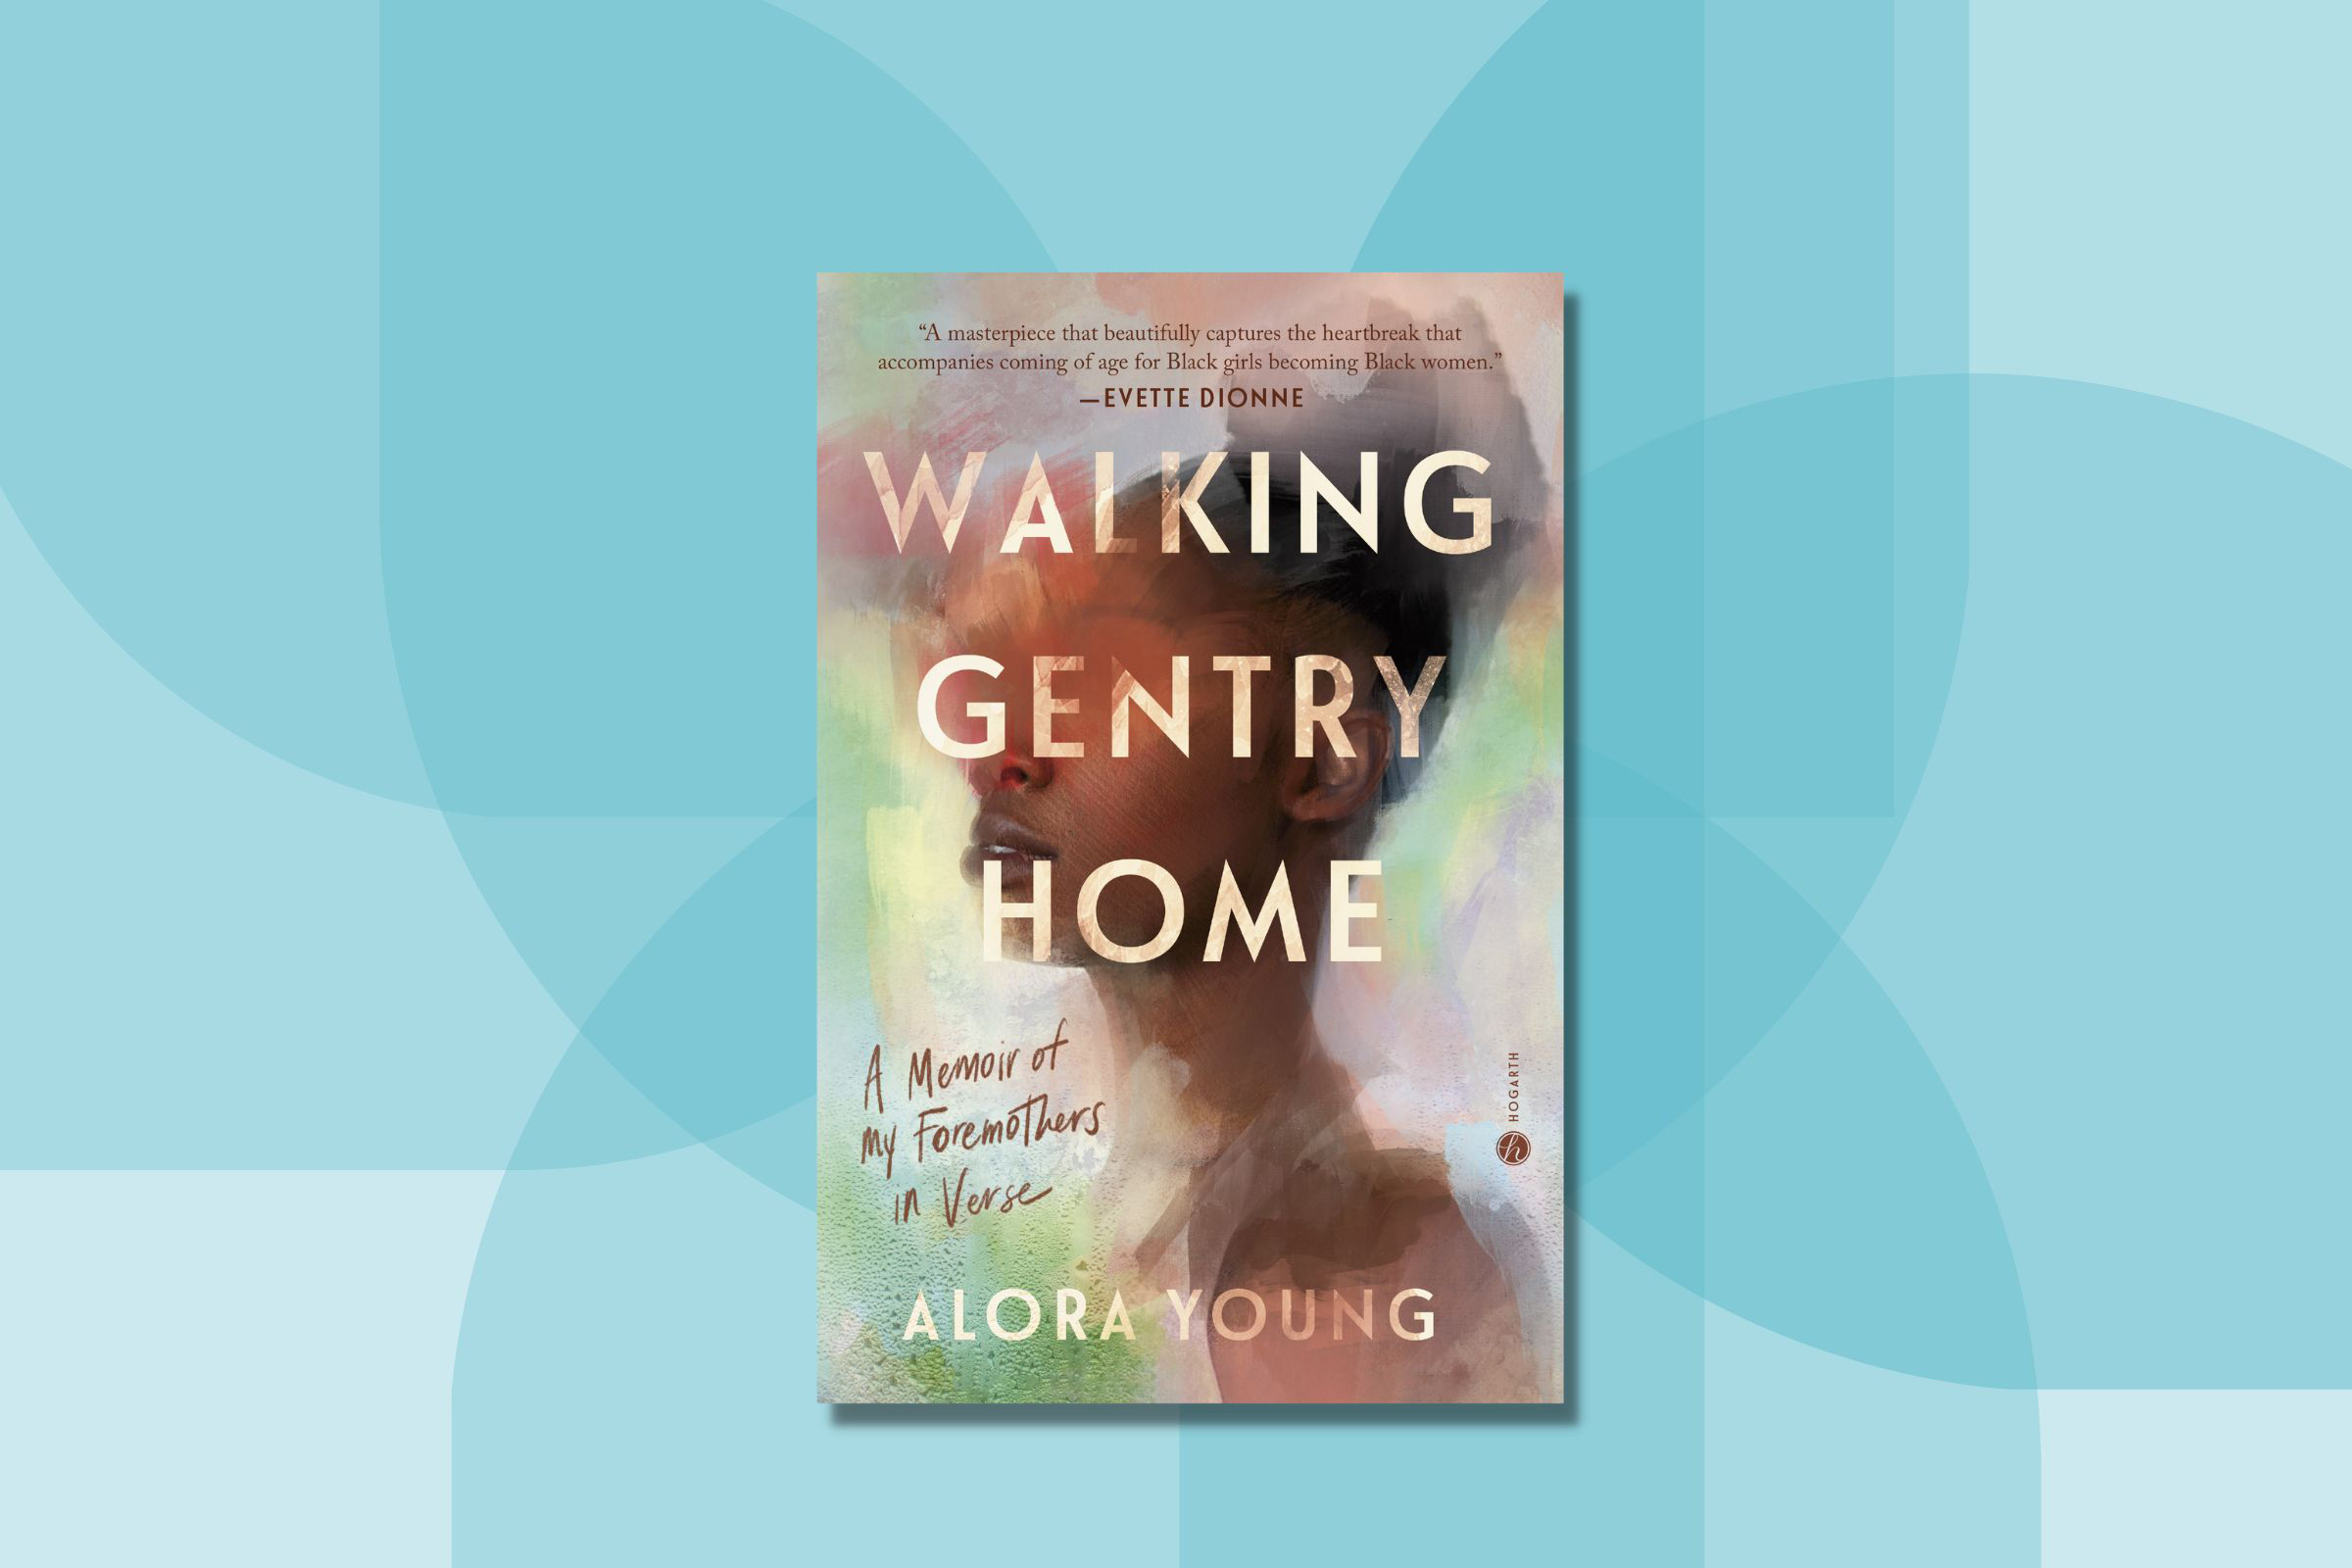 The cover of Walking Gentry Home—a muted, faded Black female face behind a translucent overlay